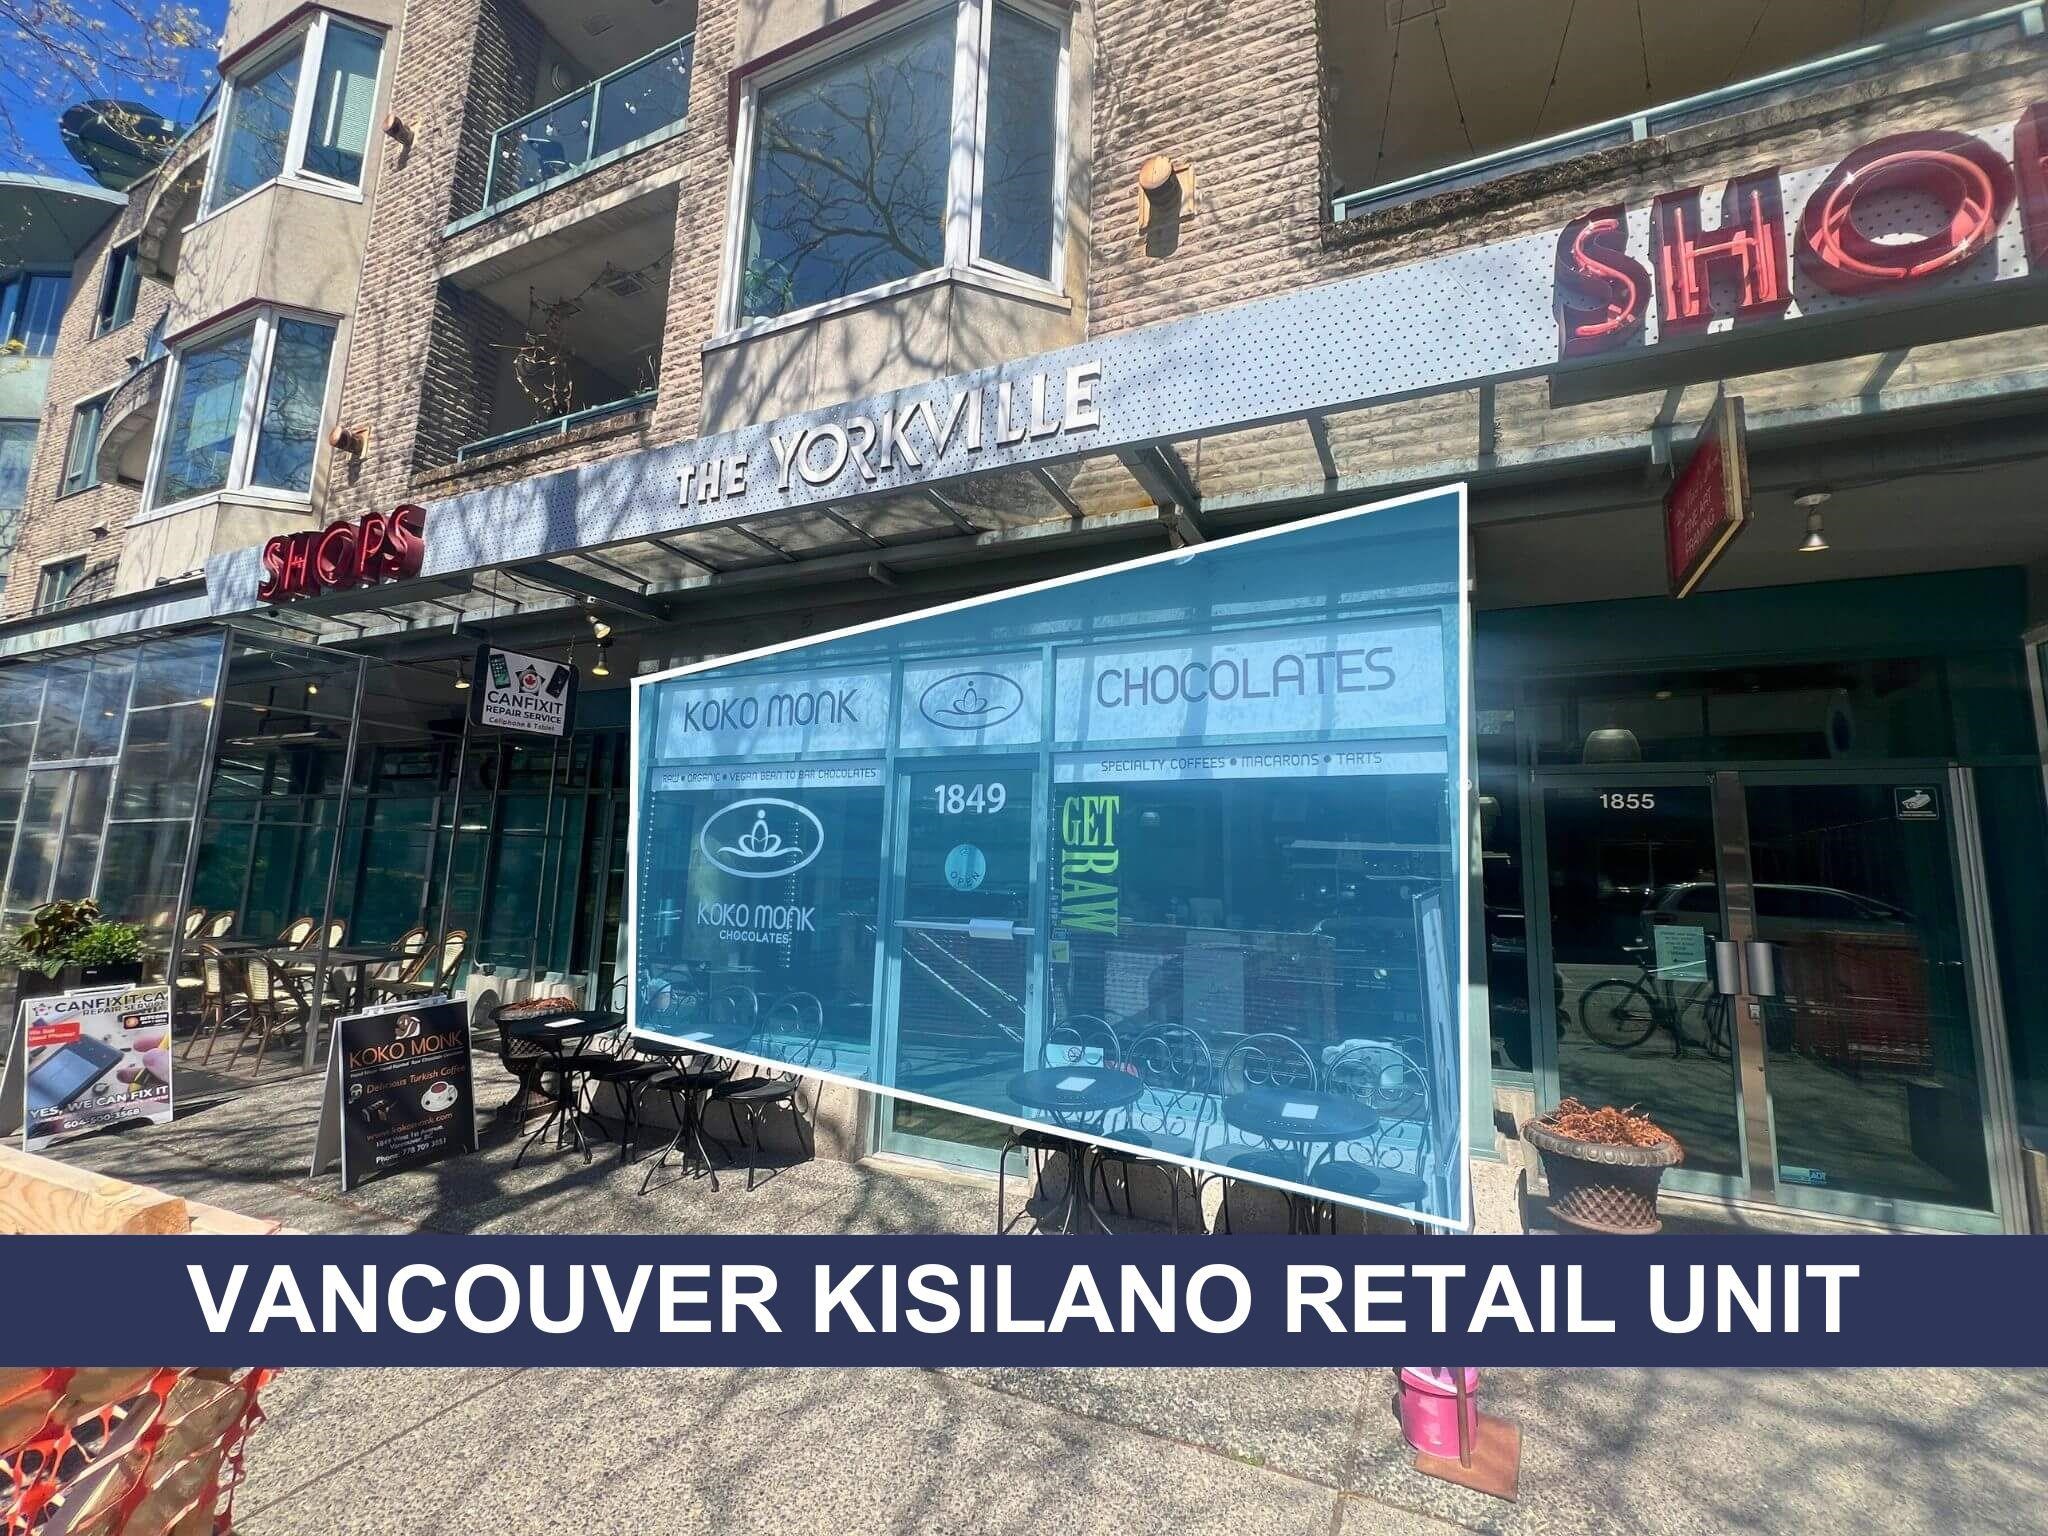 Kitsilano Land Commercial for sale:    (Listed 6800-05-08)